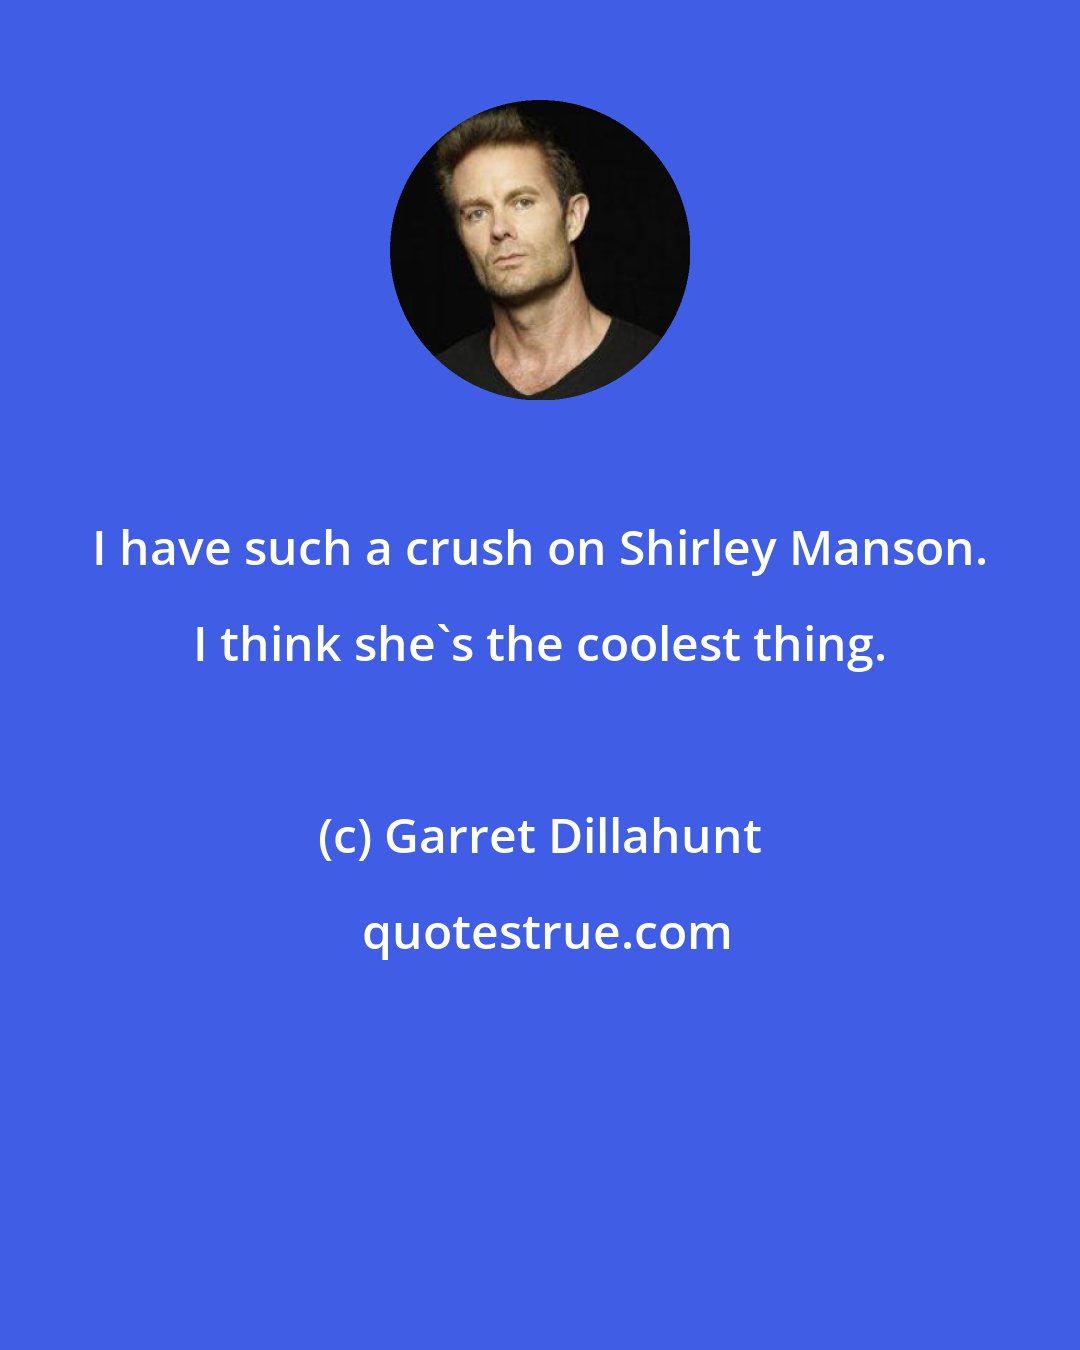 Garret Dillahunt: I have such a crush on Shirley Manson. I think she's the coolest thing.